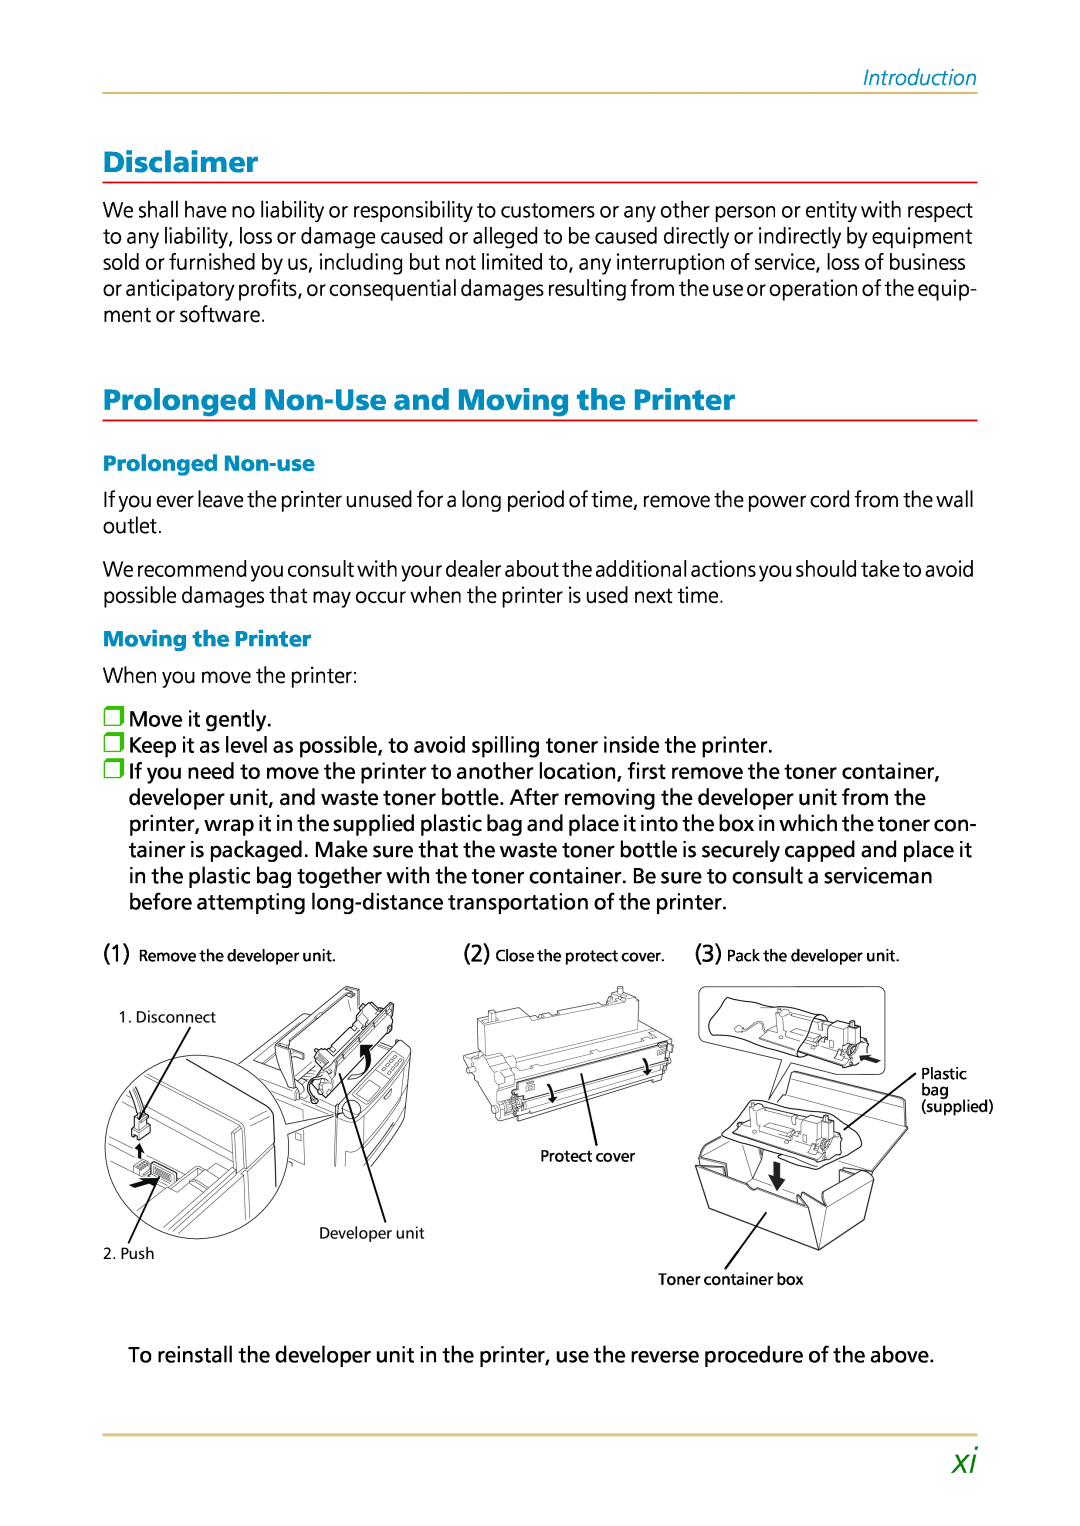 Kyocera FS-1700 user manual Disclaimer, Prolonged Non-Useand Moving the Printer, Introduction, Prolonged Non-use 